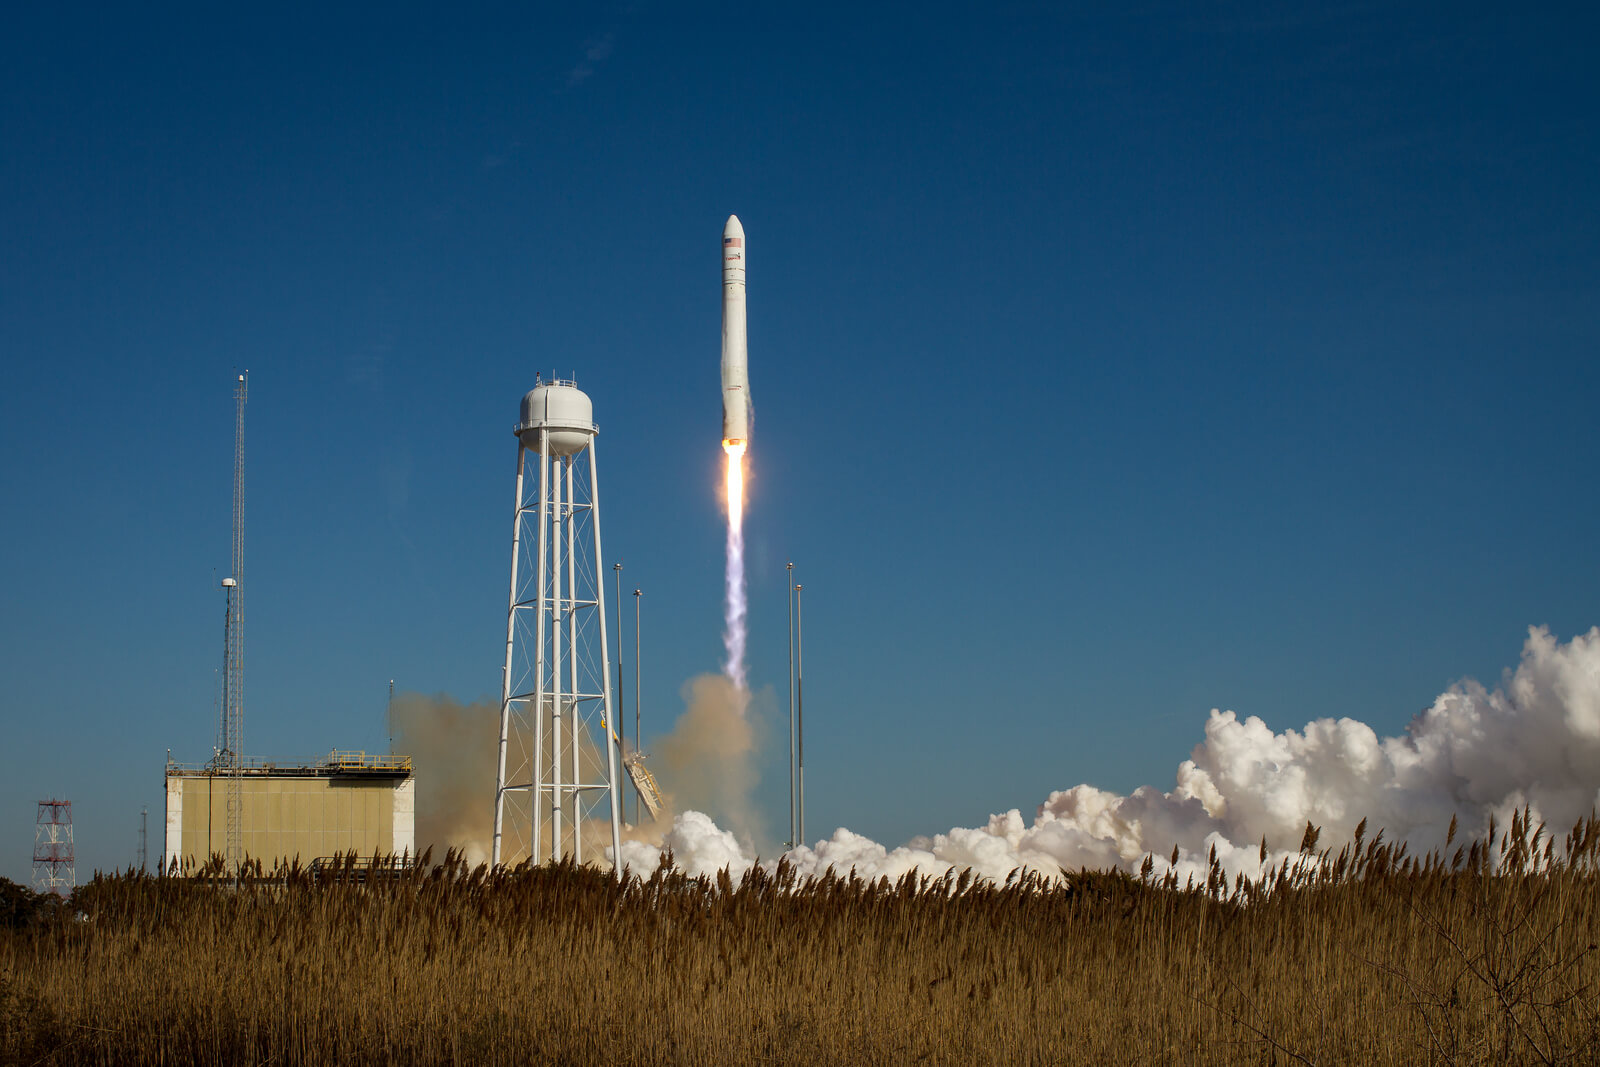 Orbital Sciences' Antares rocket launch on January 9, 2014 followed by the launch at the Wallops Space Center, Virginia on a supply mission to the International Space Station on the Cygnus spacecraft. Photo: NASA